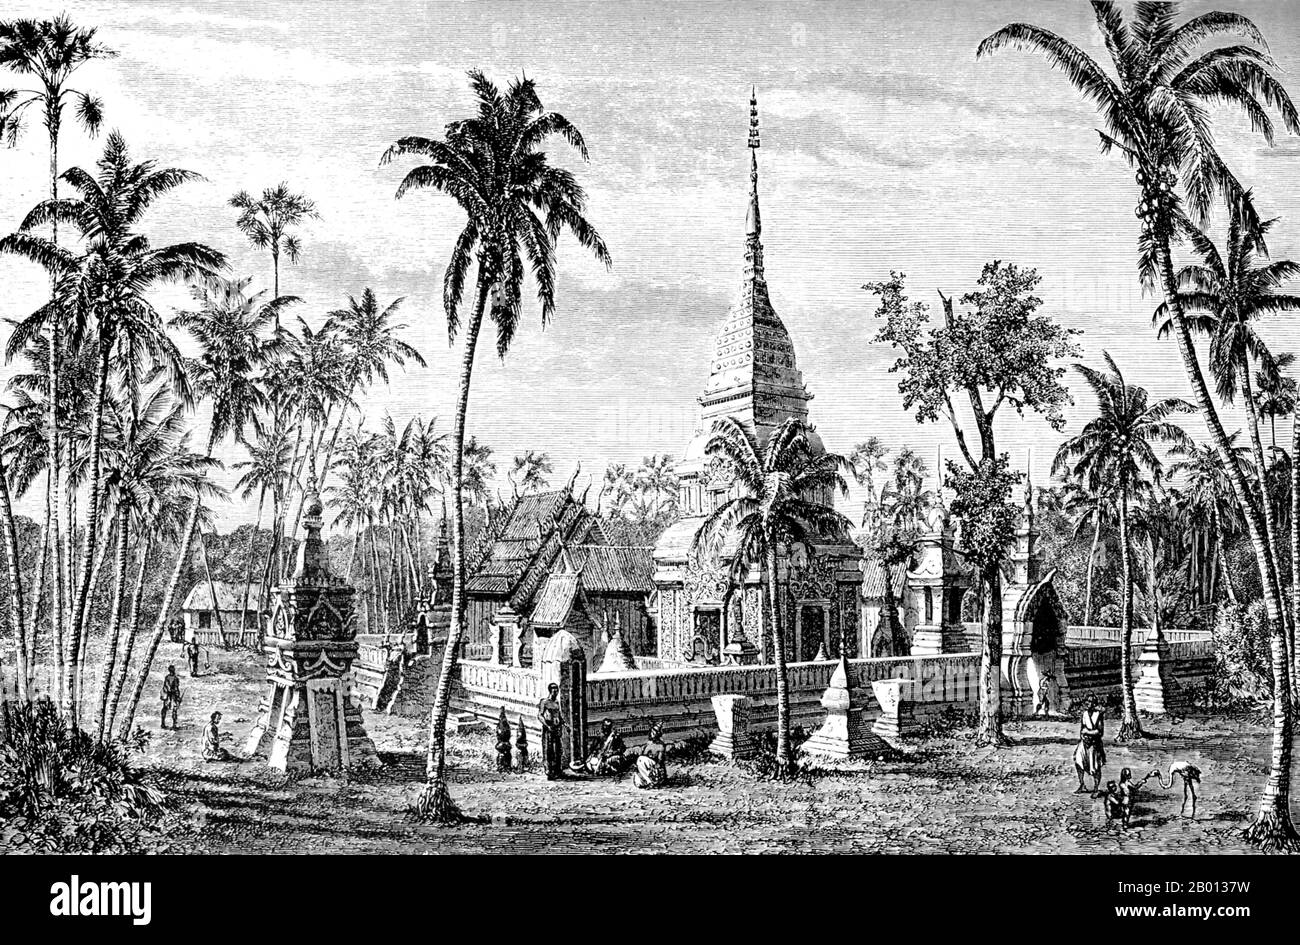 Thailand/Laos: A view of a typically northeastern Thai-style chedi, located near Nakhon Phanom in northeast Thailand by the banks of the Mekong River. Engraving by Louis Delaporte (1842-1925), 1867.  Isan, also written as Isaan, Isarn, Issan, or Esarn, is the northeast region of Thailand. It is located on the Khorat Plateau, bordered by the Mekong River (along the border with Laos) to the north and east, by Cambodia to the southeast and the Prachinburi mountains south of Nakhon Ratchasima. To the west it is separated from Northern and Central Thailand by the Phetchabun mountain range. Stock Photo